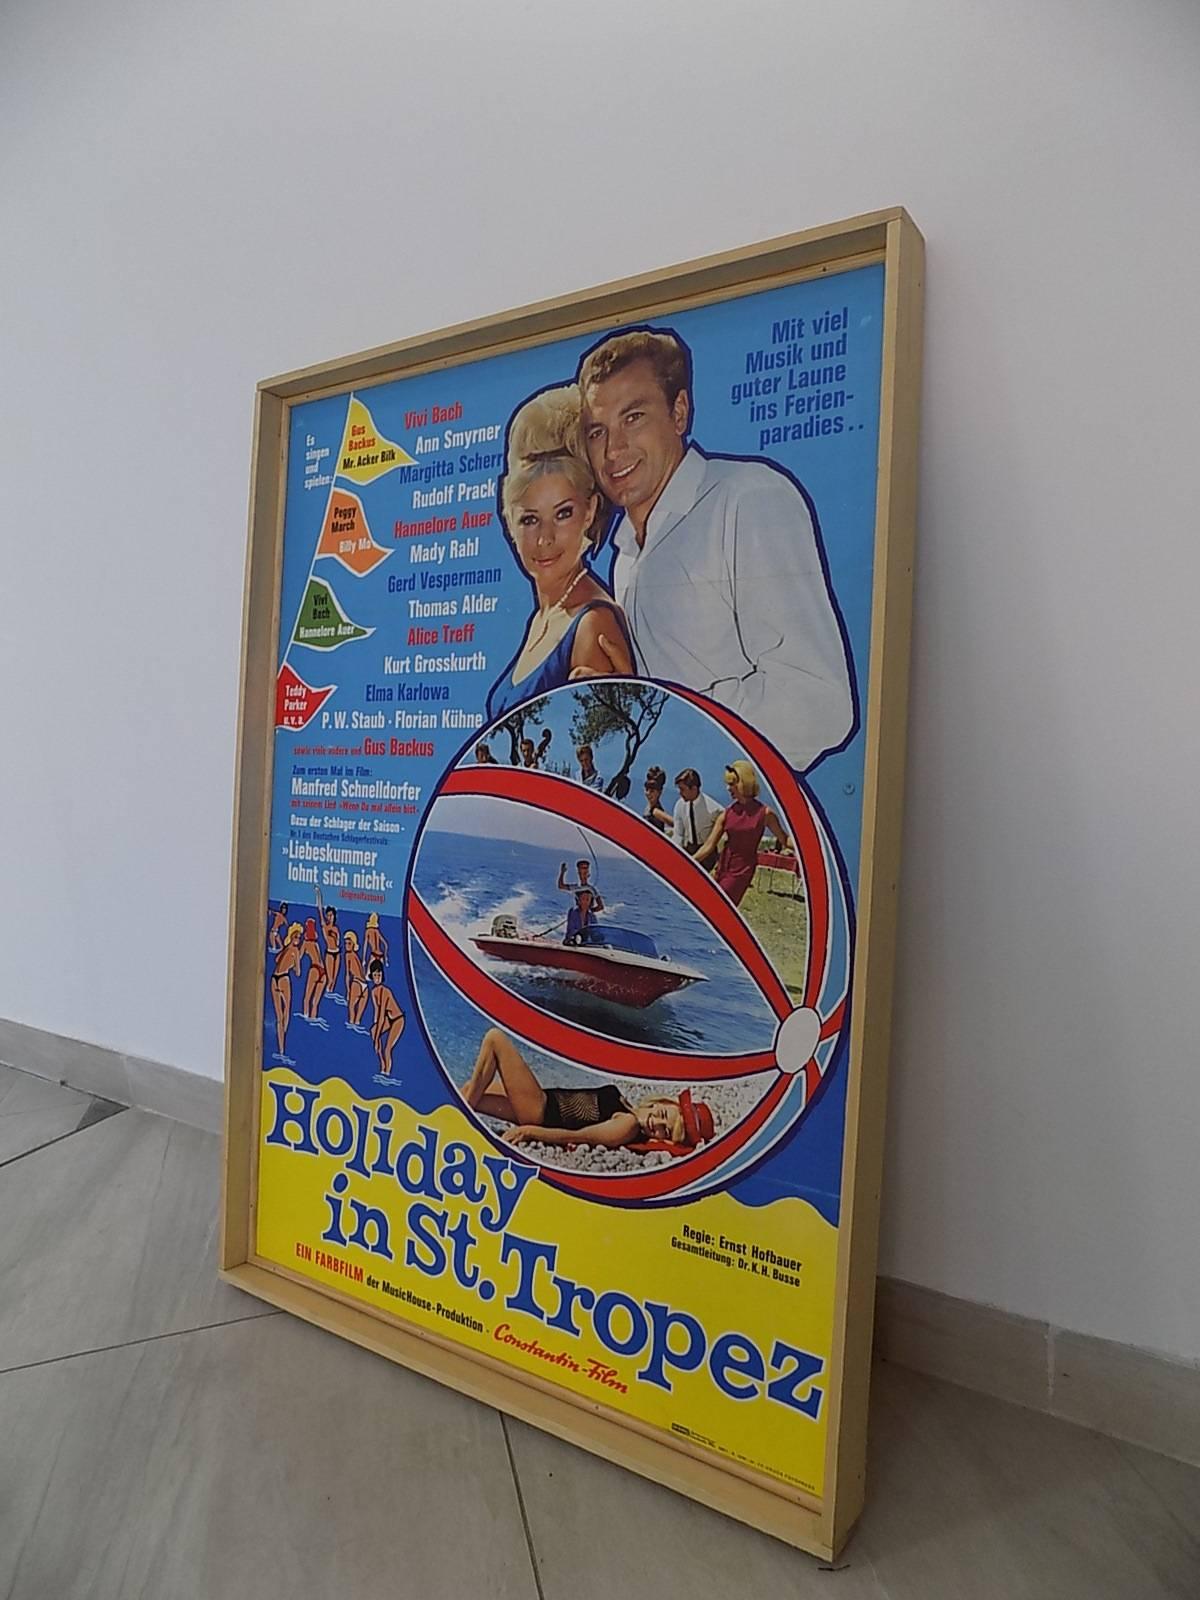 Holiday in Saint Tropez vintage movie poster.